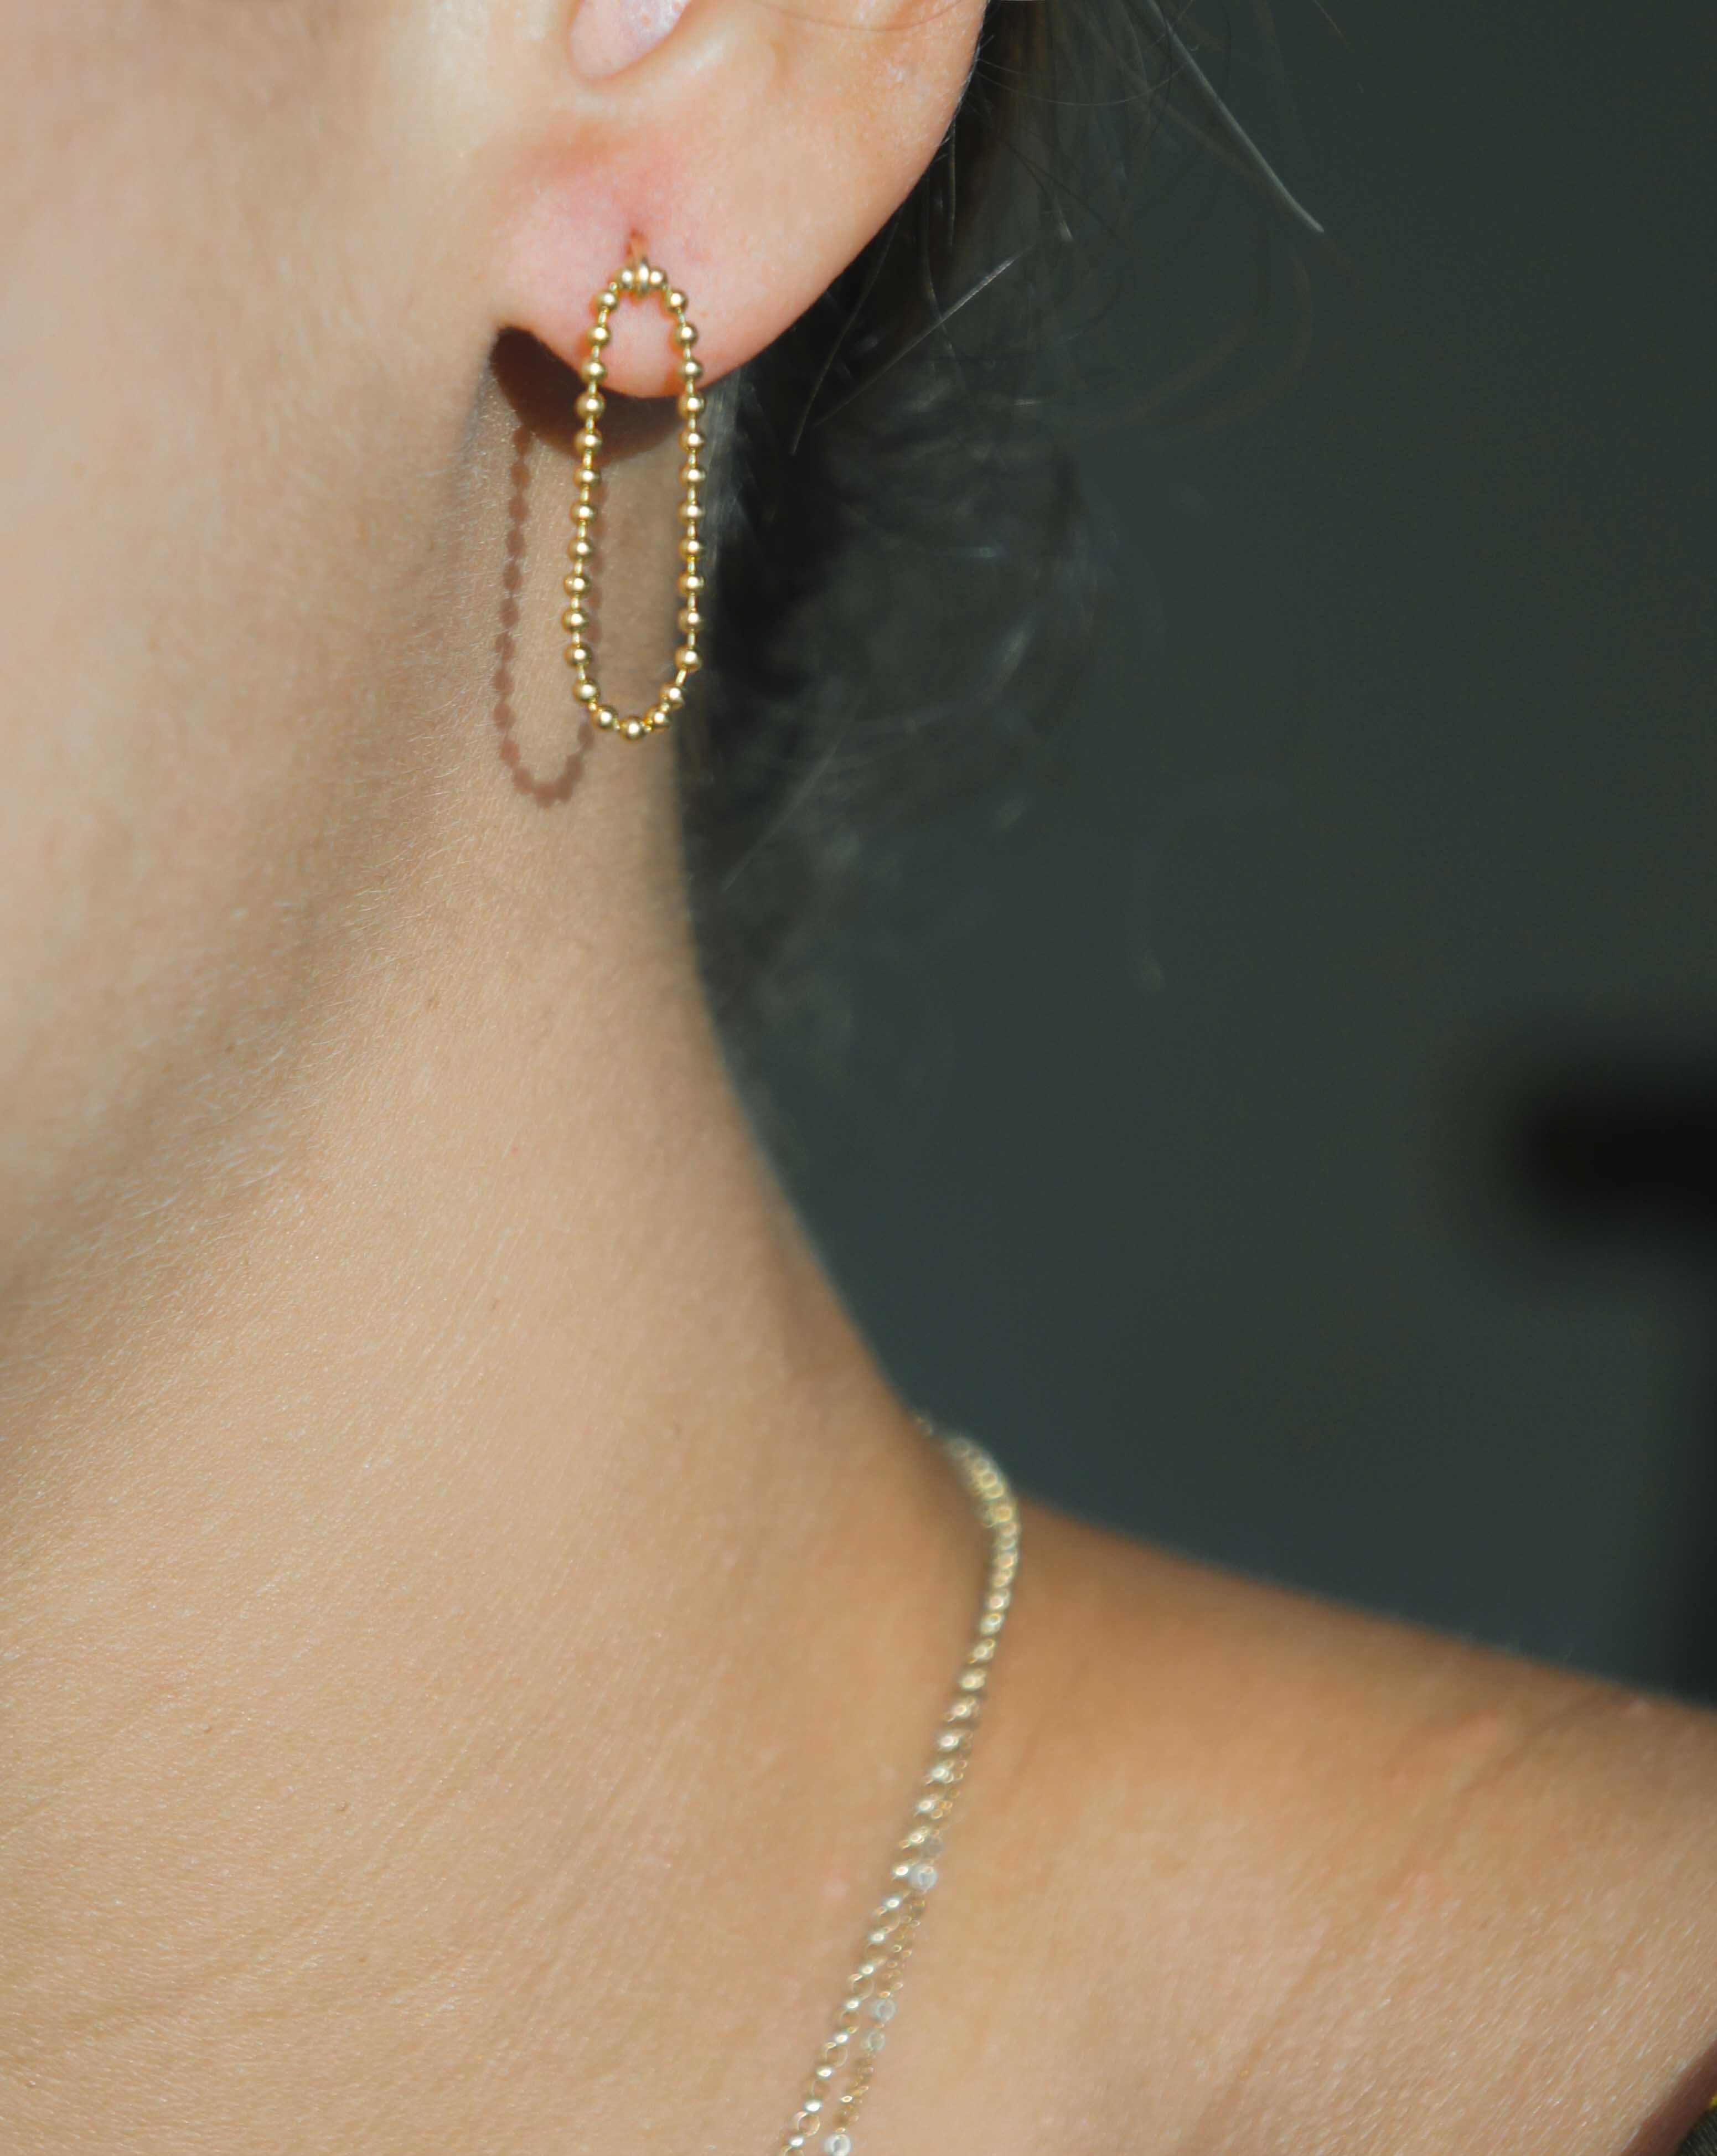 Lata Earrings by KOZAKH. 14K Gold Filled drop style stud earrings, with drop length of 1 inch, featuring linked gold balls.